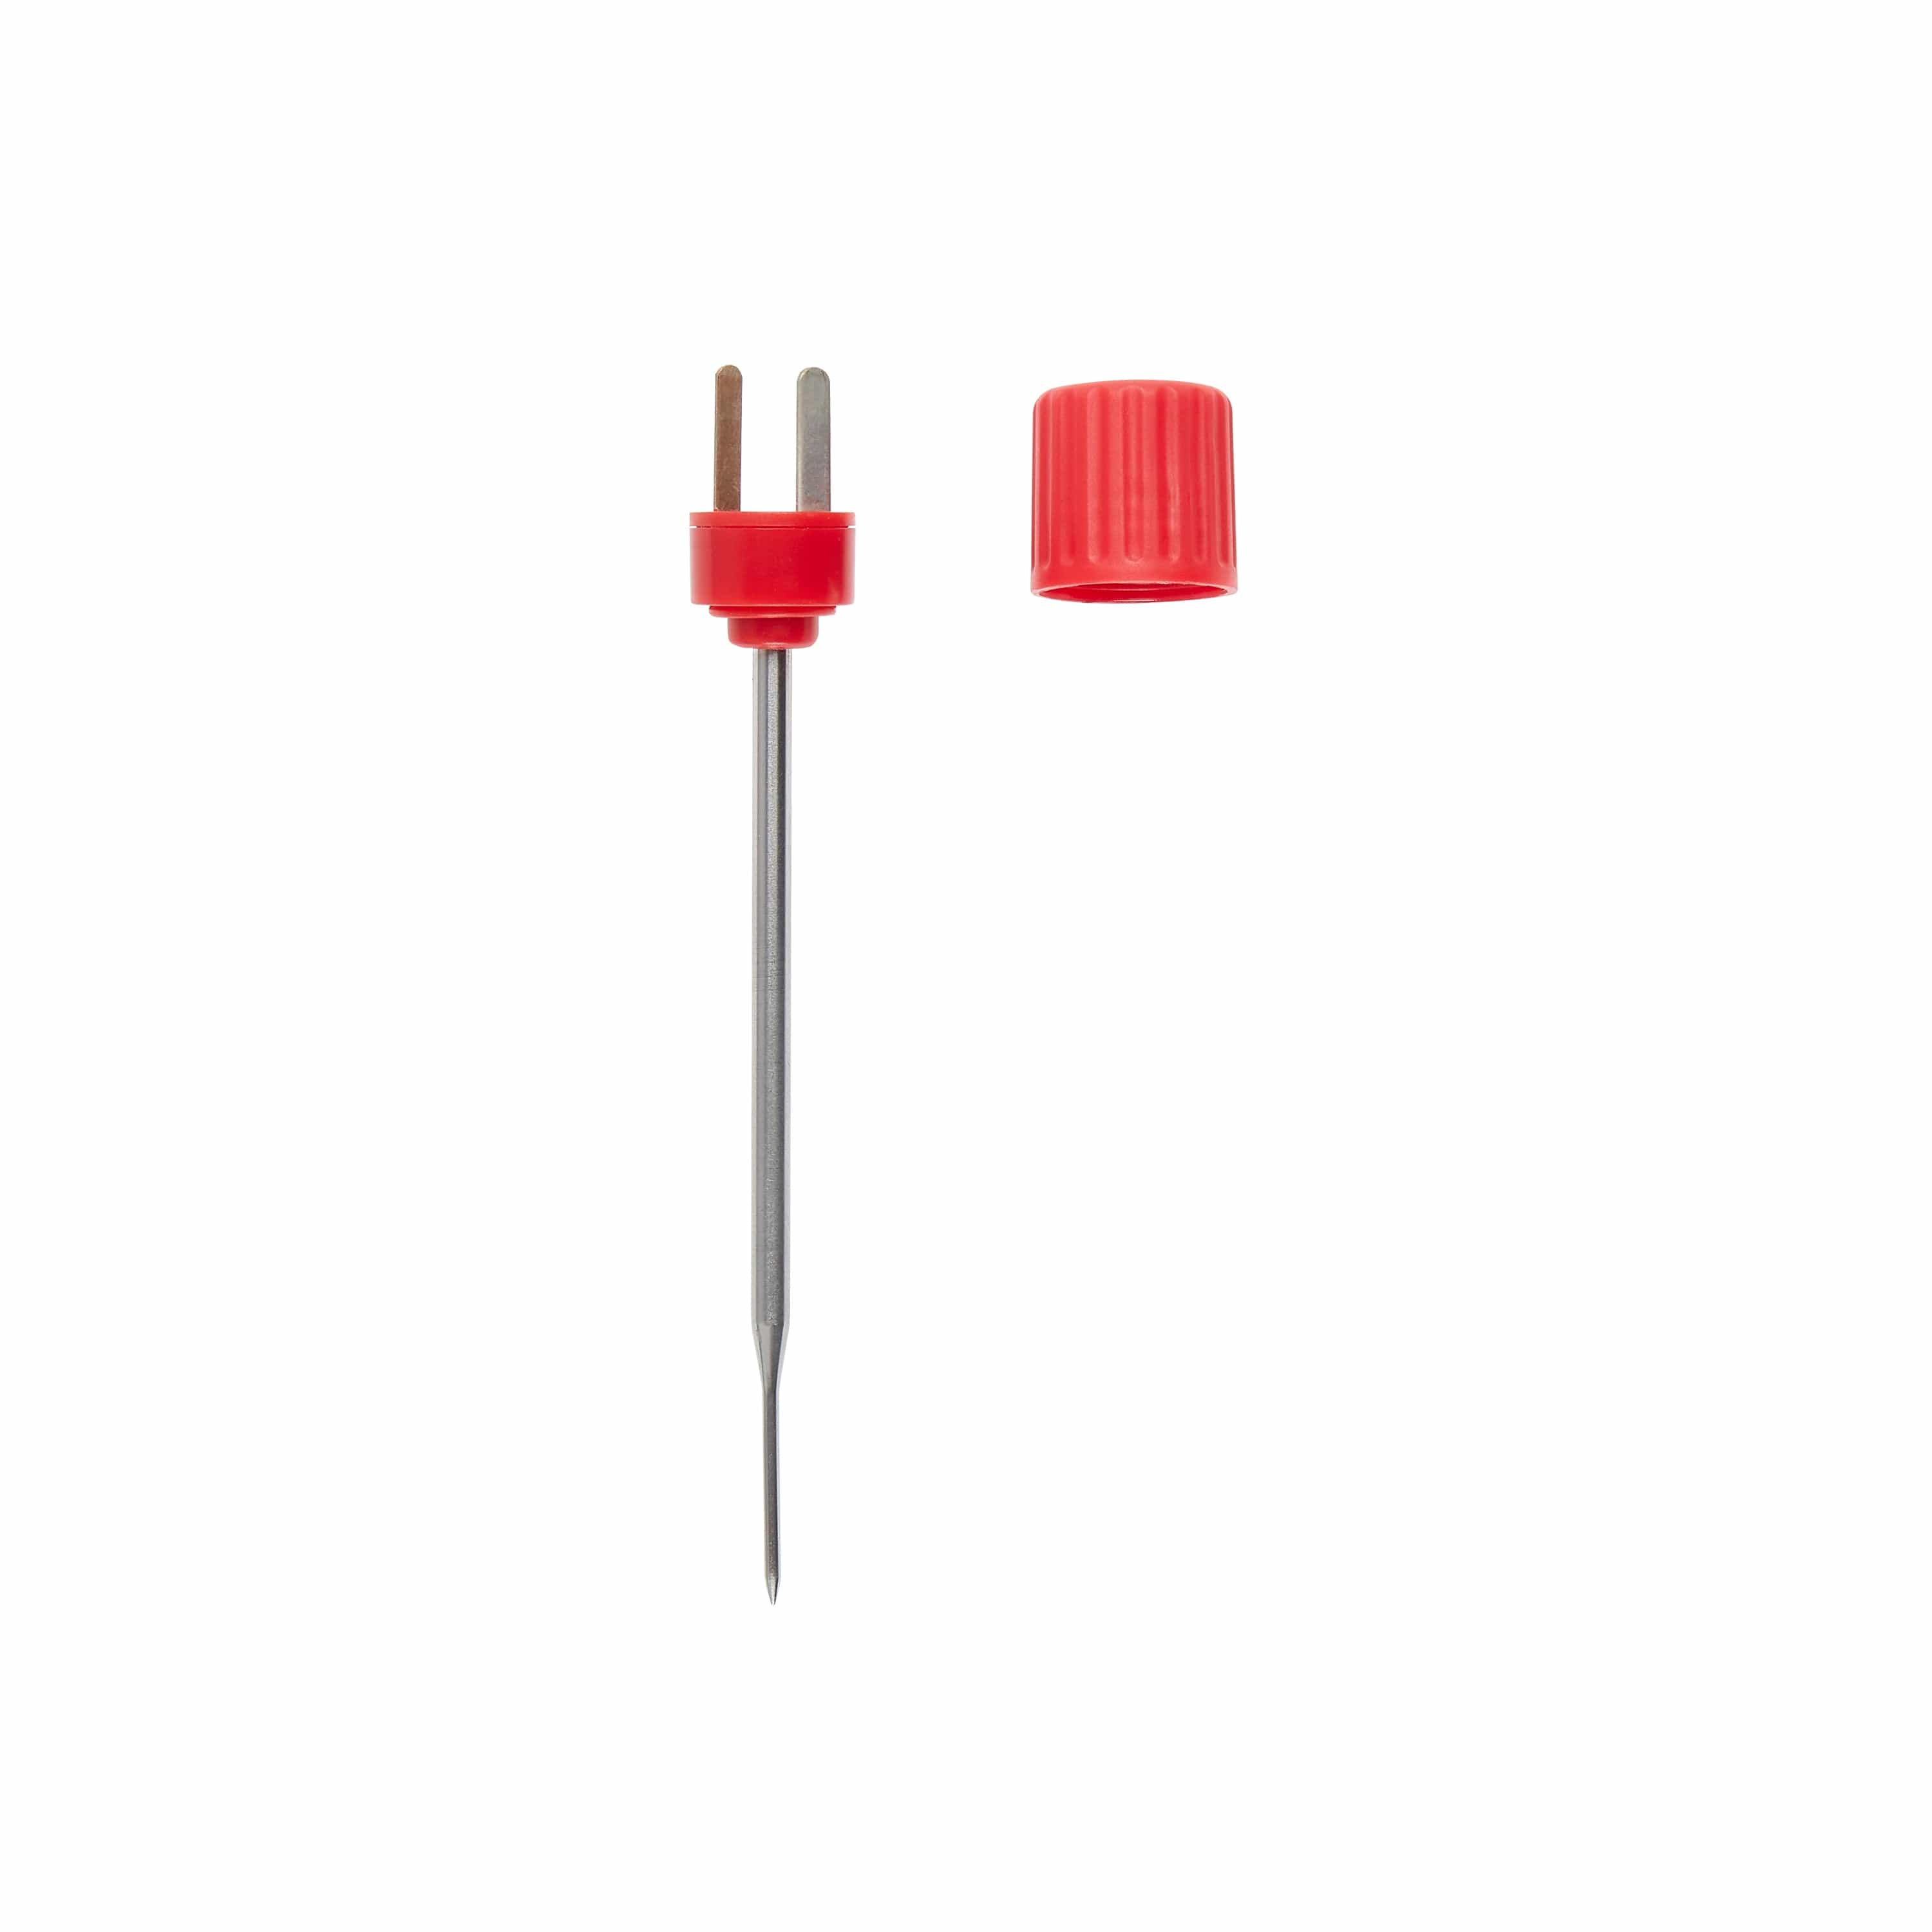 ThermoProbe Replacement Probes